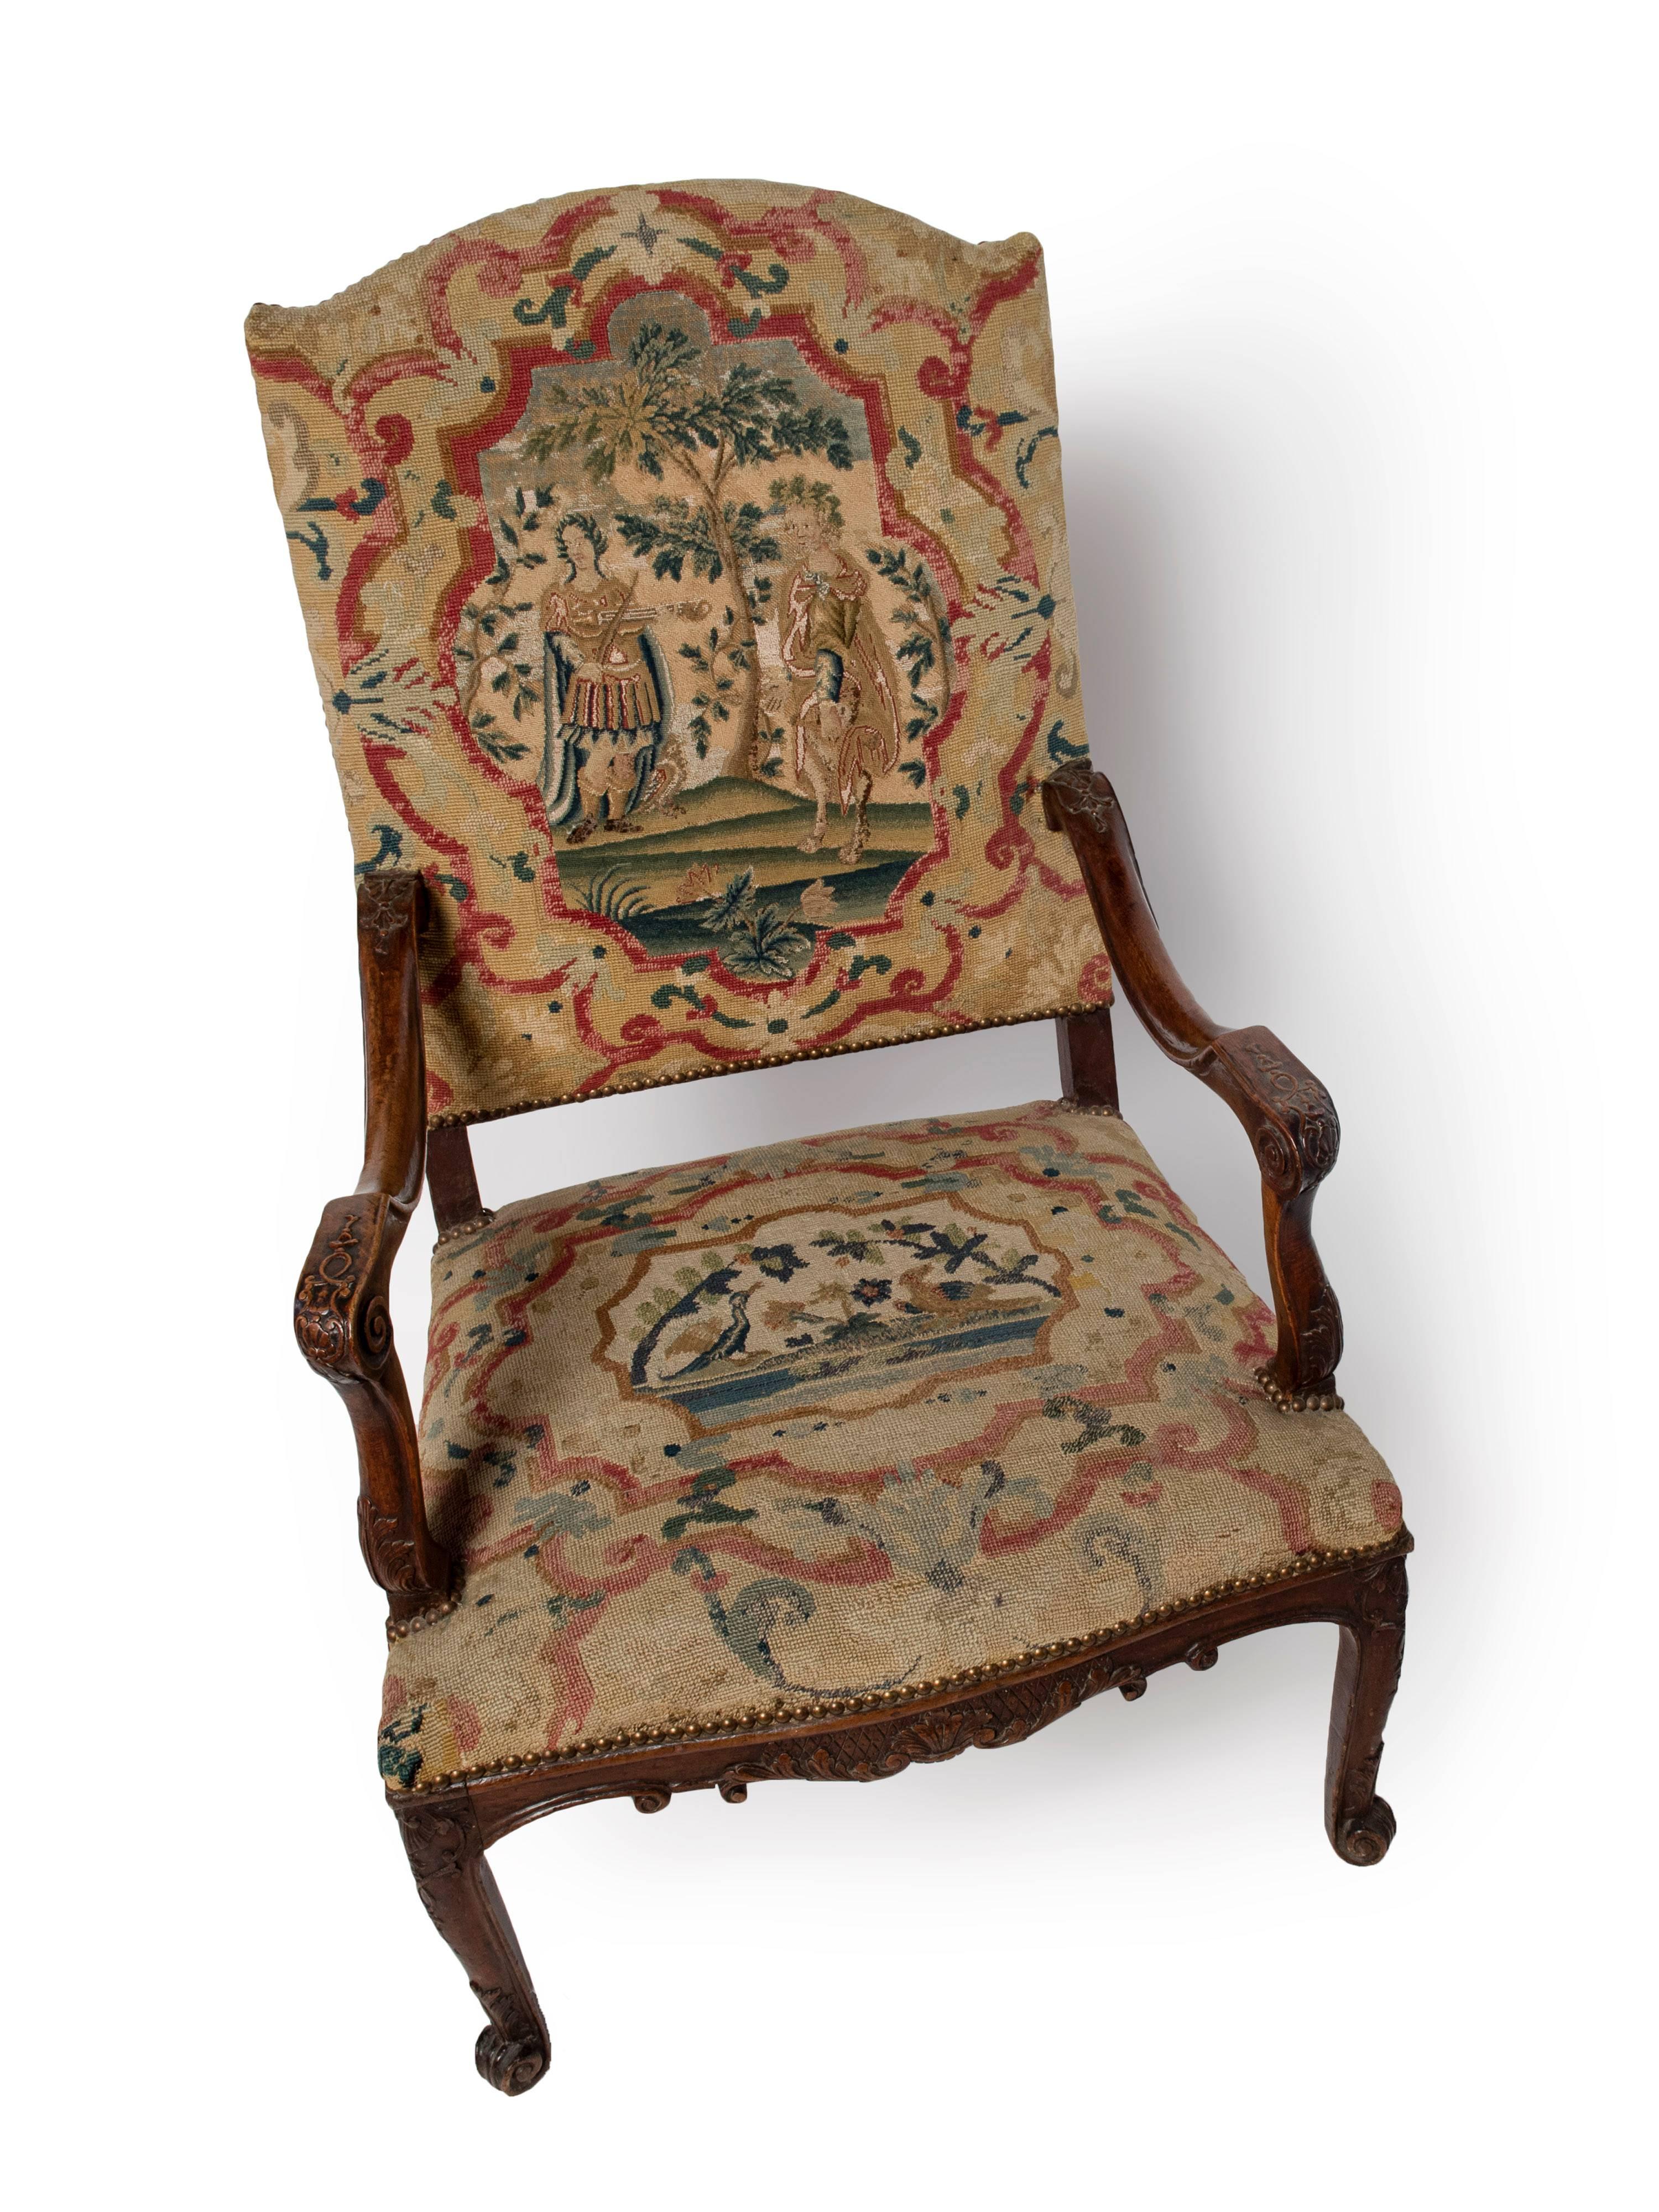 A Regency fauteuil with petit point upholstery.